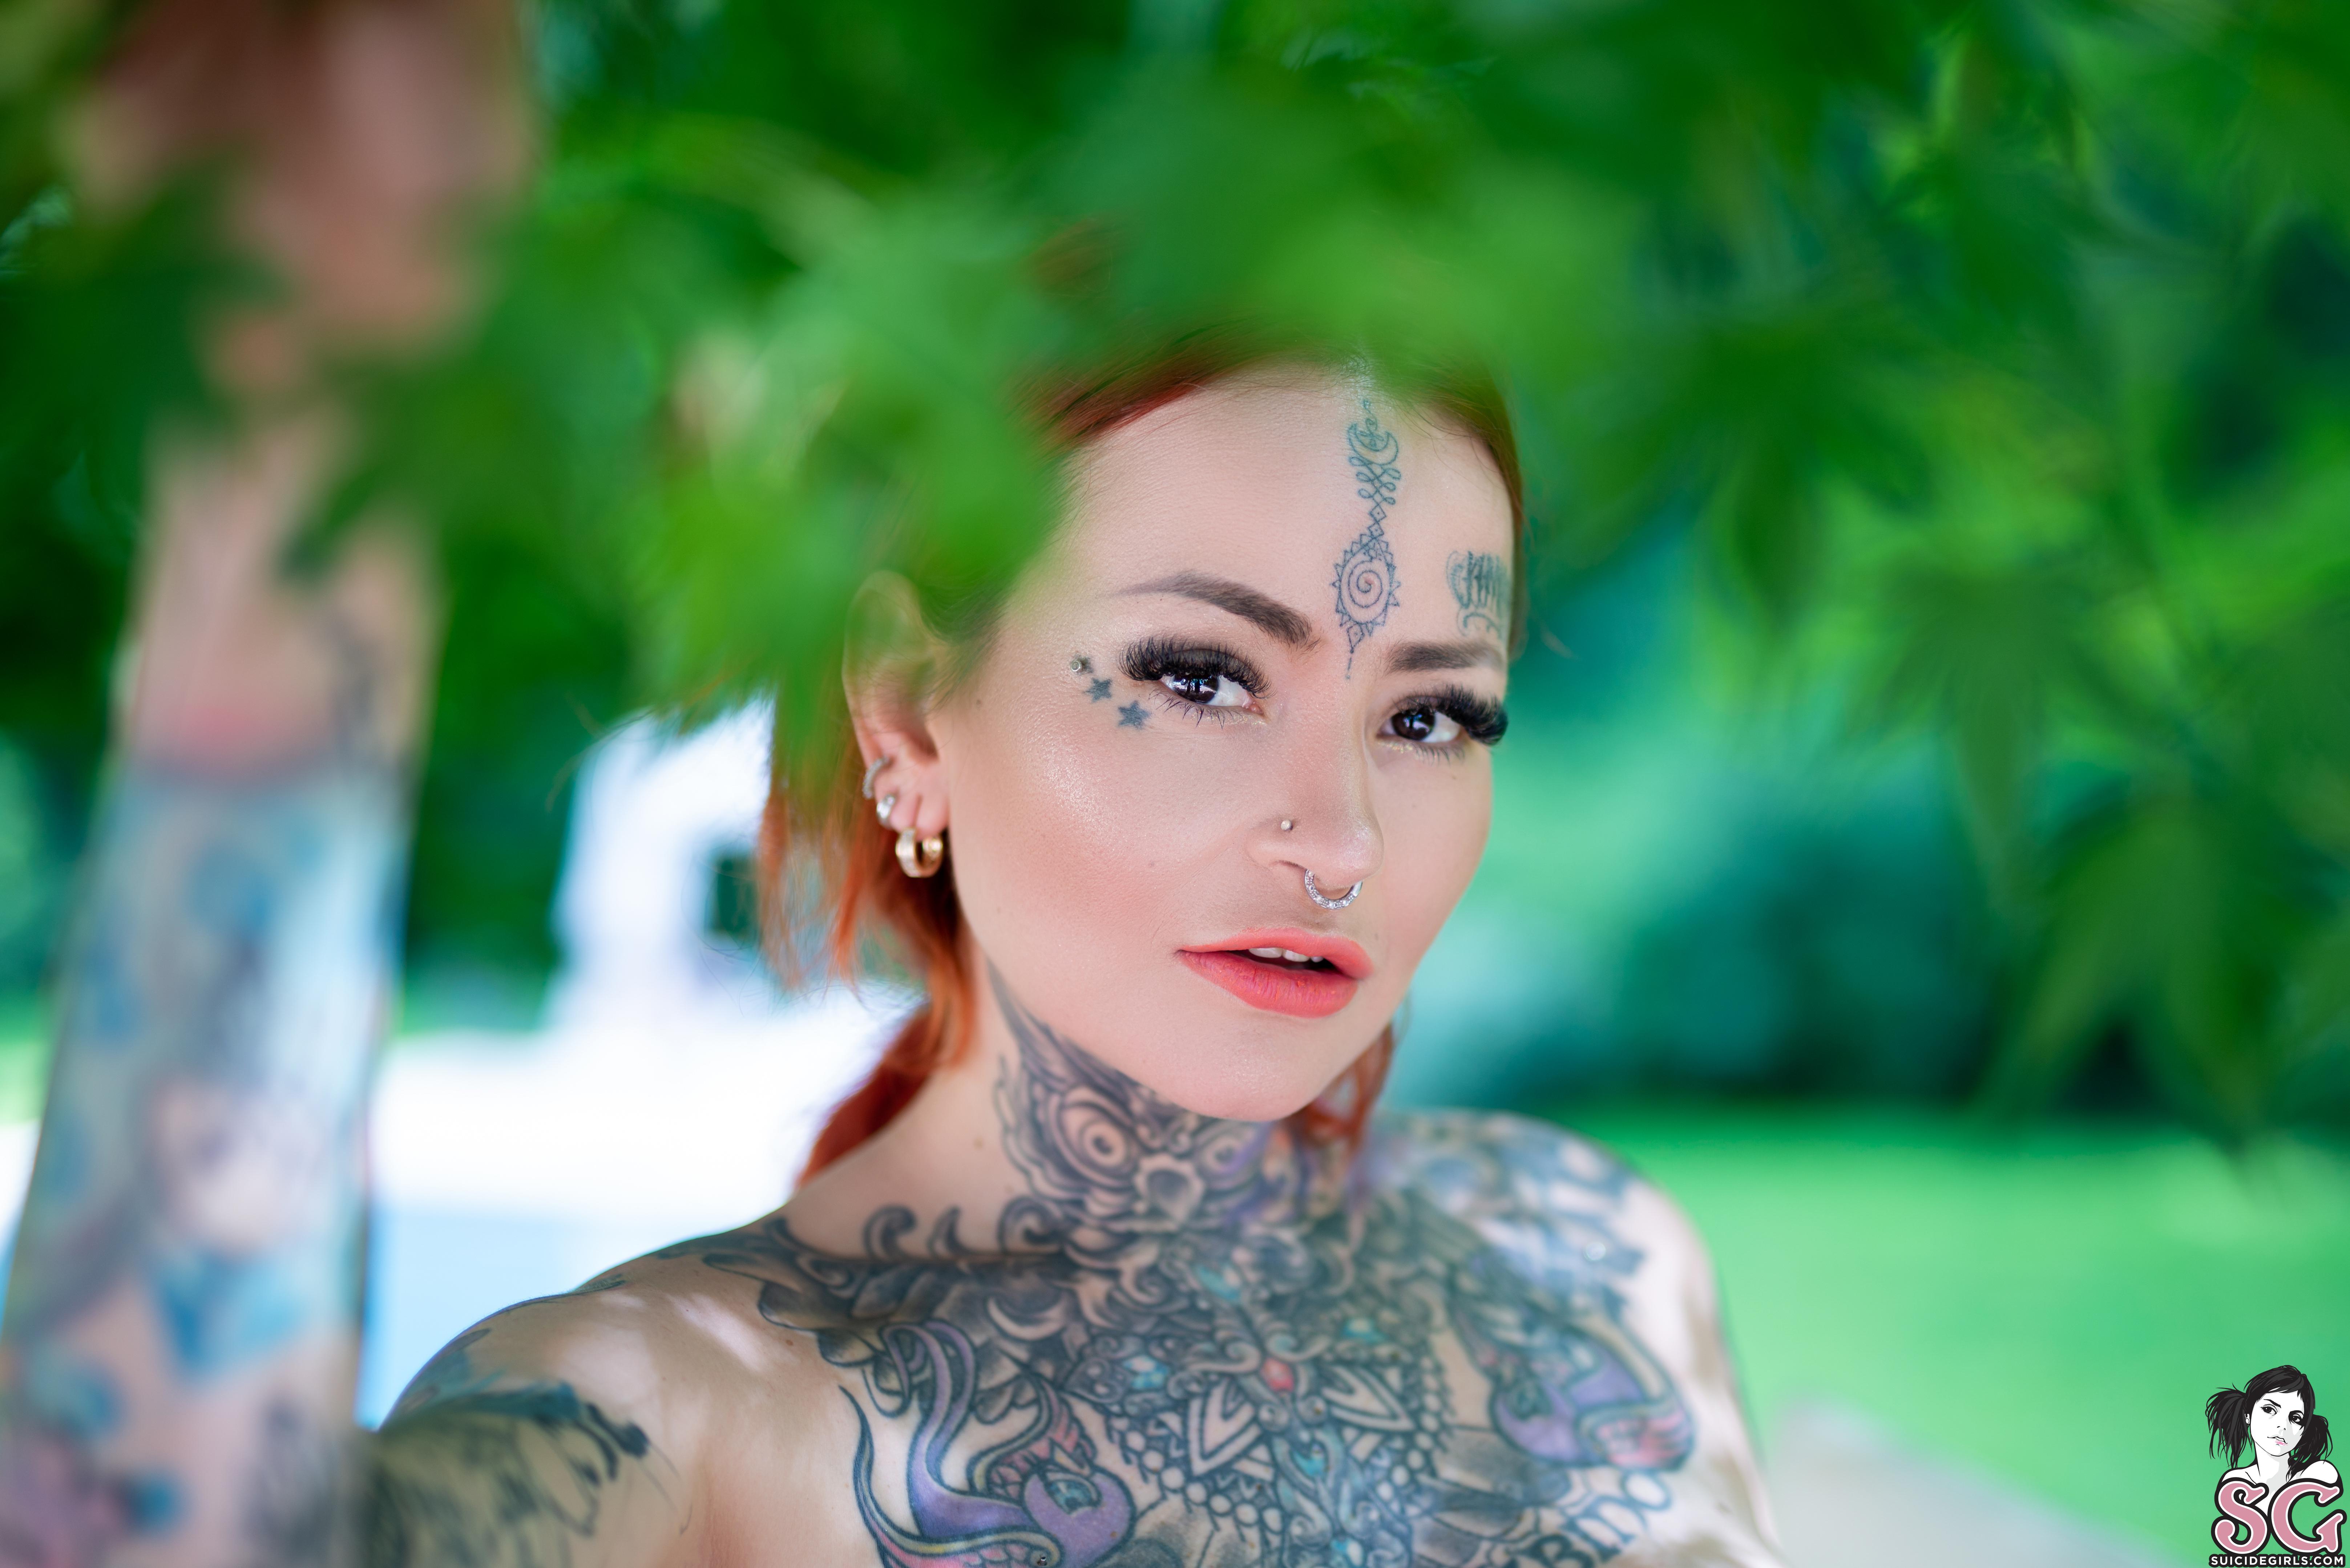 People 6468x4317 Krito Suicide women inked girls redhead nature garden trees Suicide Girls blurred